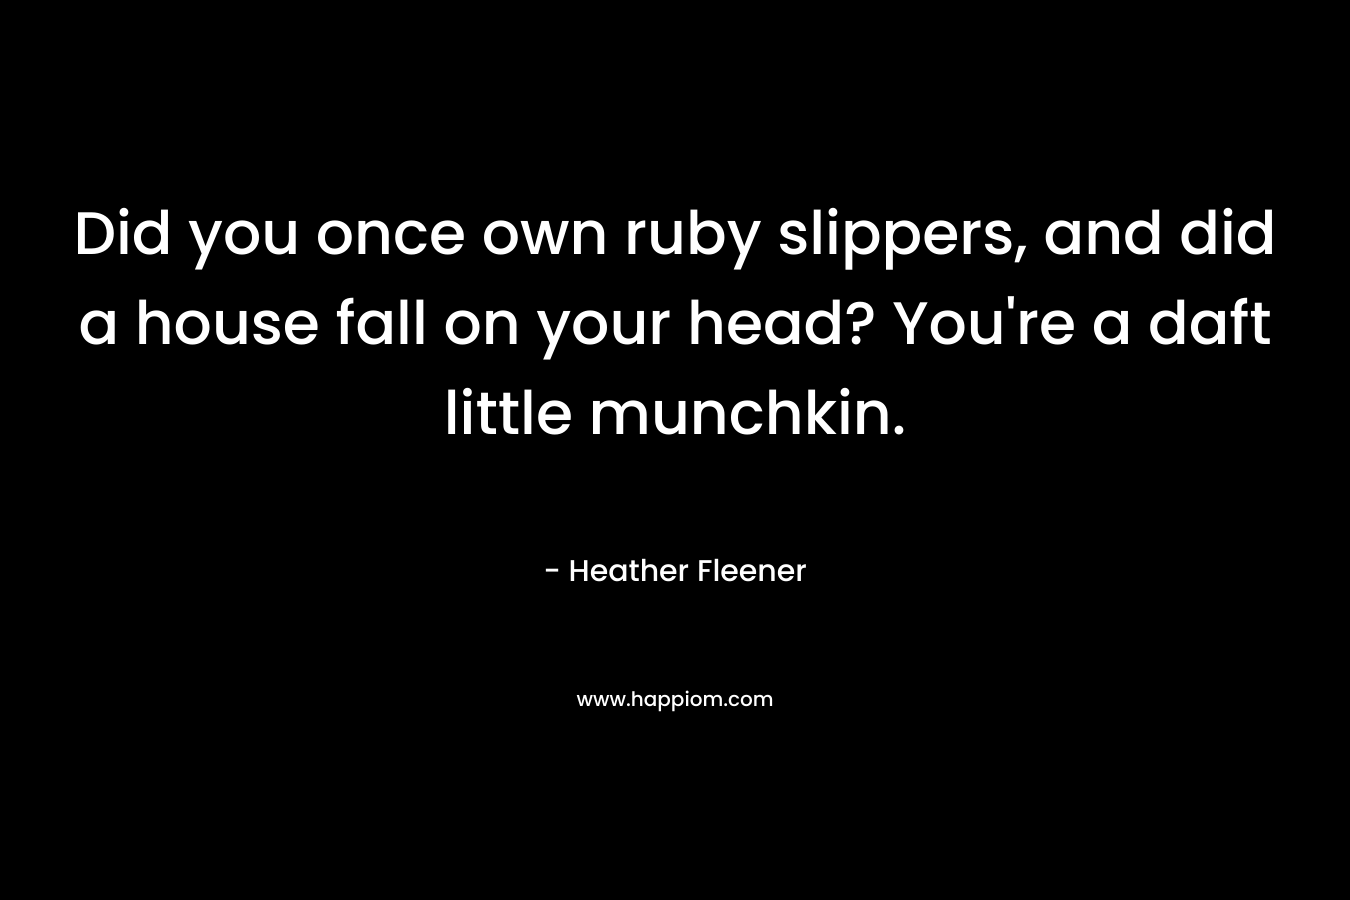 Did you once own ruby slippers, and did a house fall on your head? You’re a daft little munchkin. – Heather Fleener